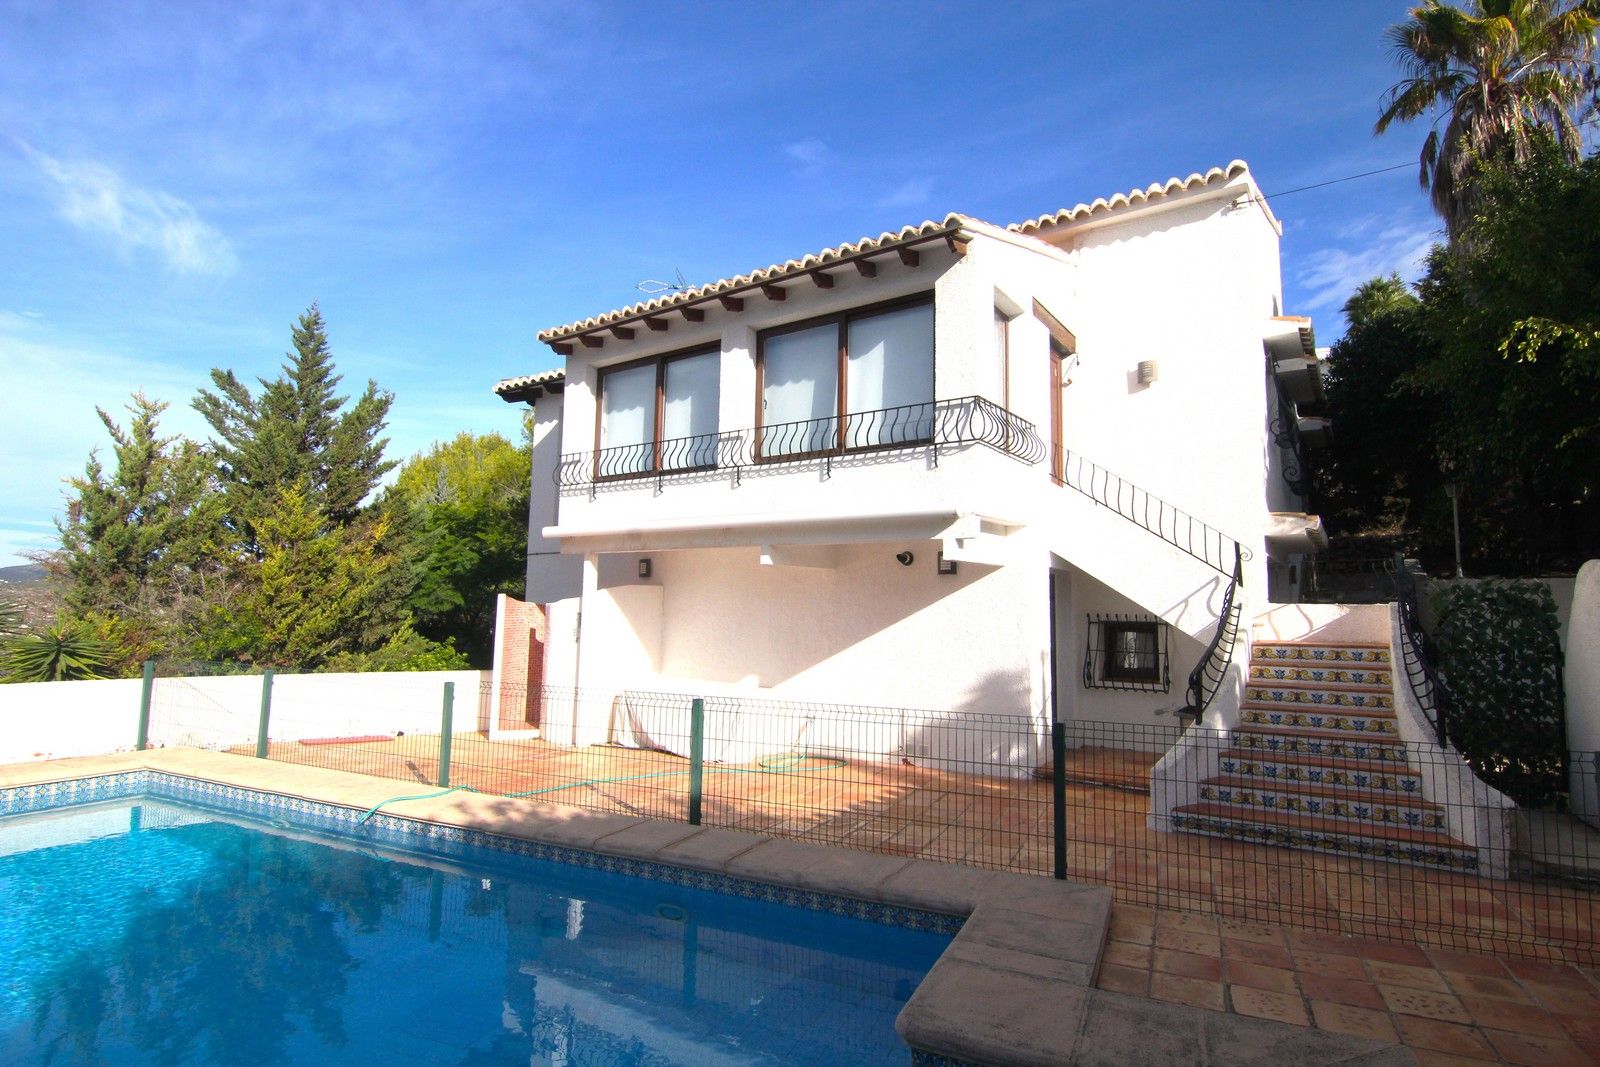 Renovated villa in Valle del Portet with pool for sale.